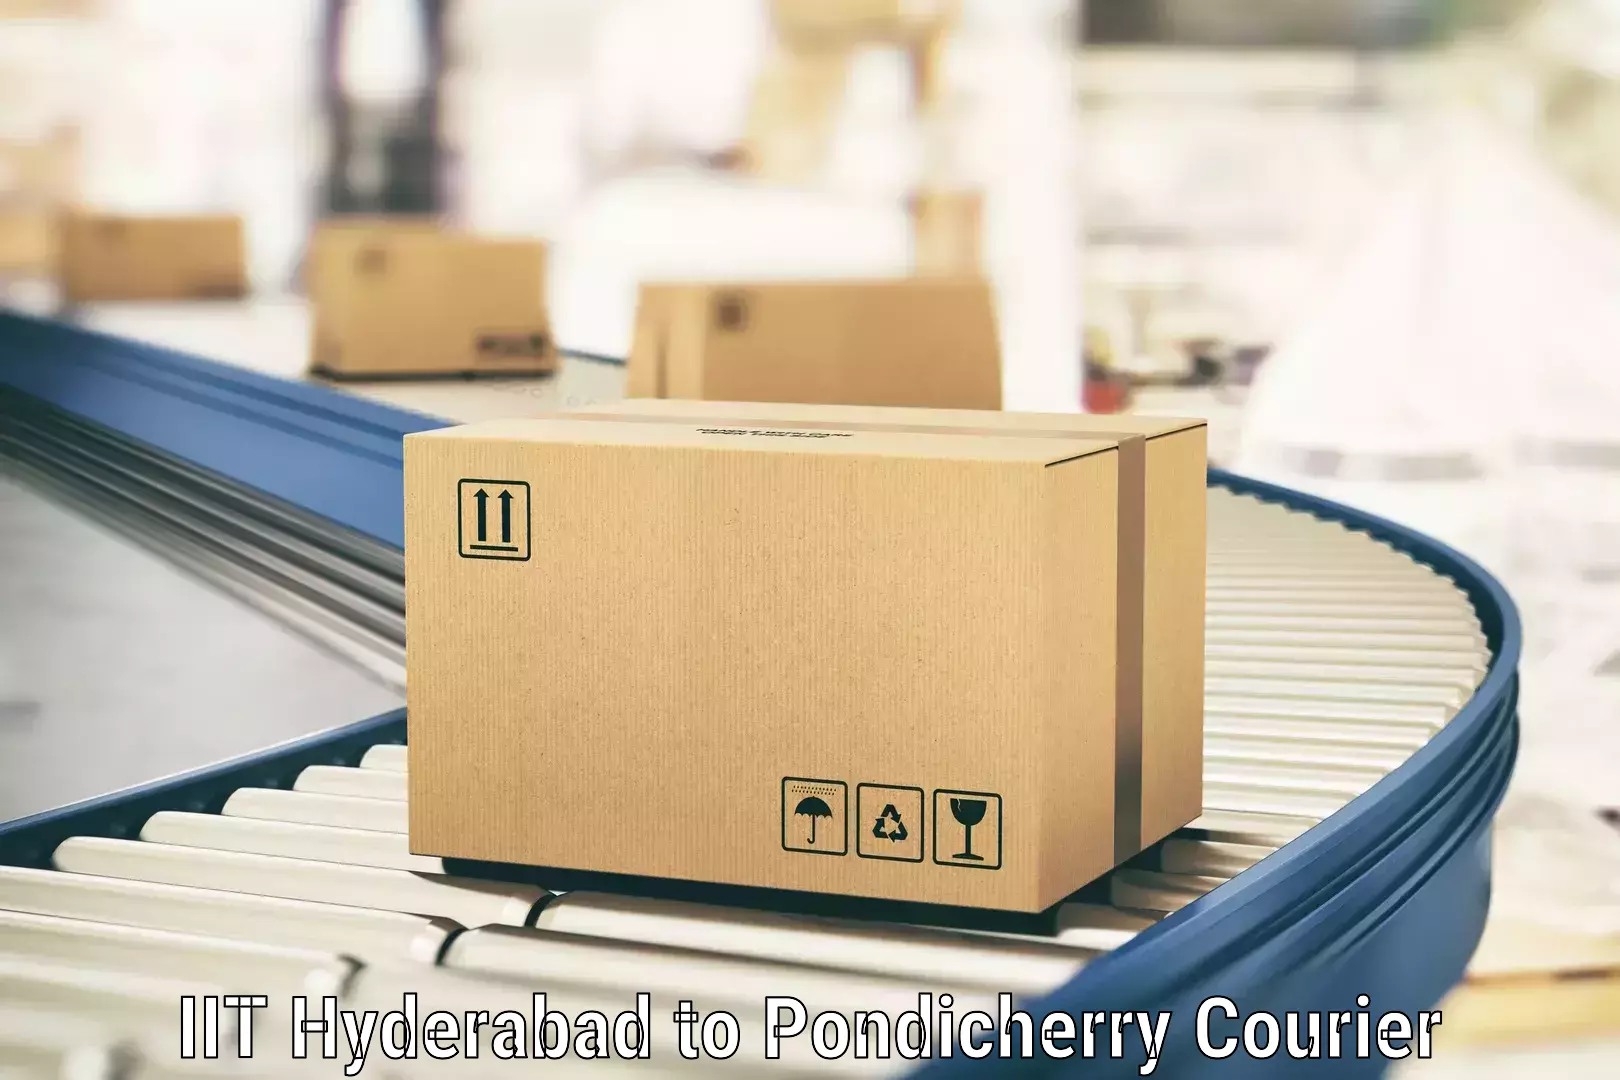 Affordable shipping rates IIT Hyderabad to Pondicherry University